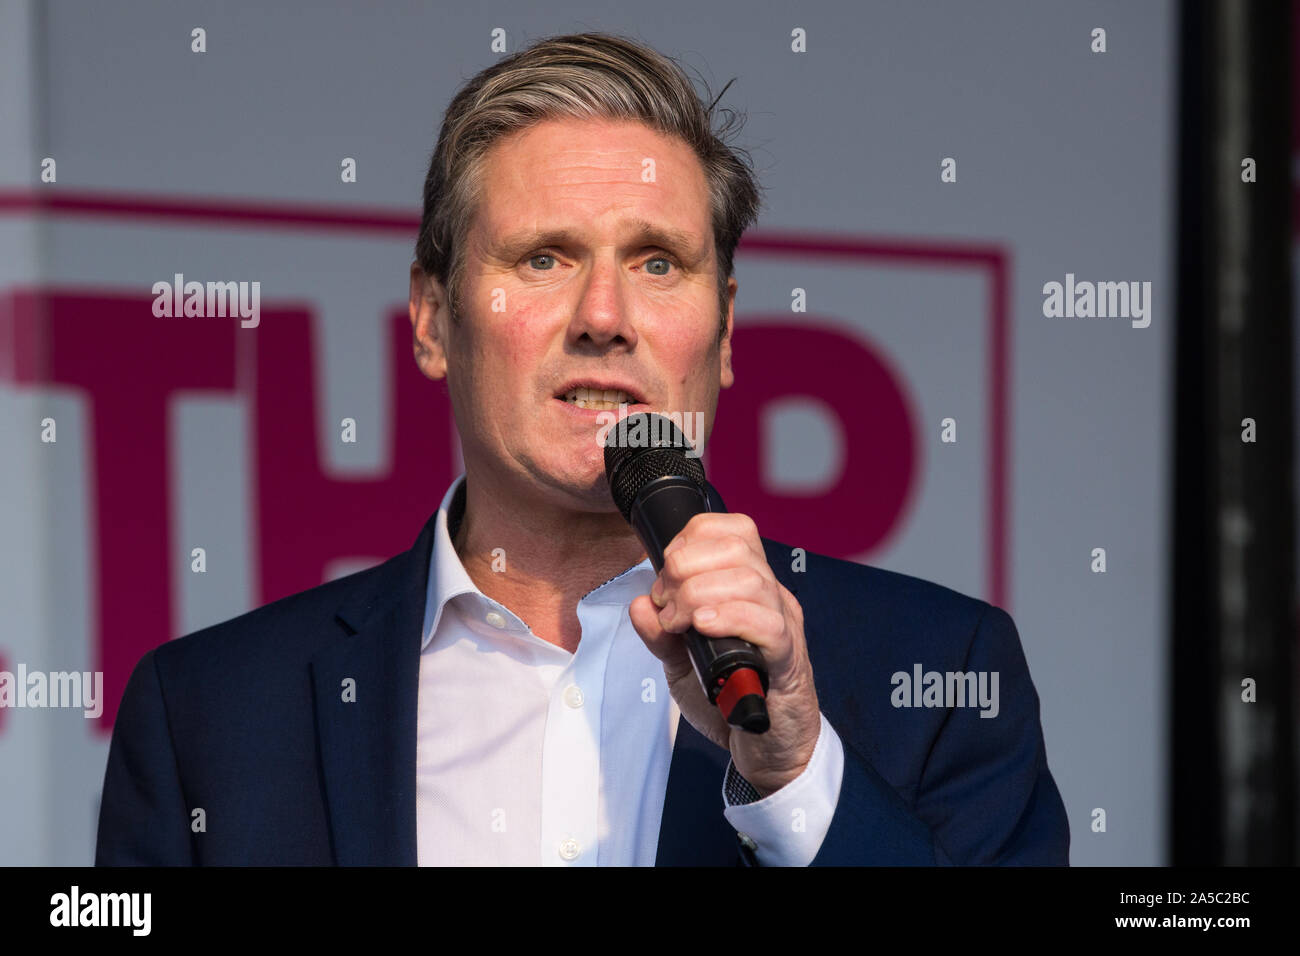 London, UK. 19 October, 2019. Sir Keir Starmer, Shadow Secretary of State for Exiting the European Union, addresses hundreds of thousands of pro-EU citizens at a Together for the Final Say People’s Vote rally in Parliament Square as MPs meet in a ‘super Saturday’ Commons session, the first such sitting since the Falklands conflict, to vote, subject to the Sir Oliver Letwin amendment, on the Brexit deal negotiated by Prime Minister Boris Johnson with the European Union. Credit: Mark Kerrison/Alamy Live News Stock Photo